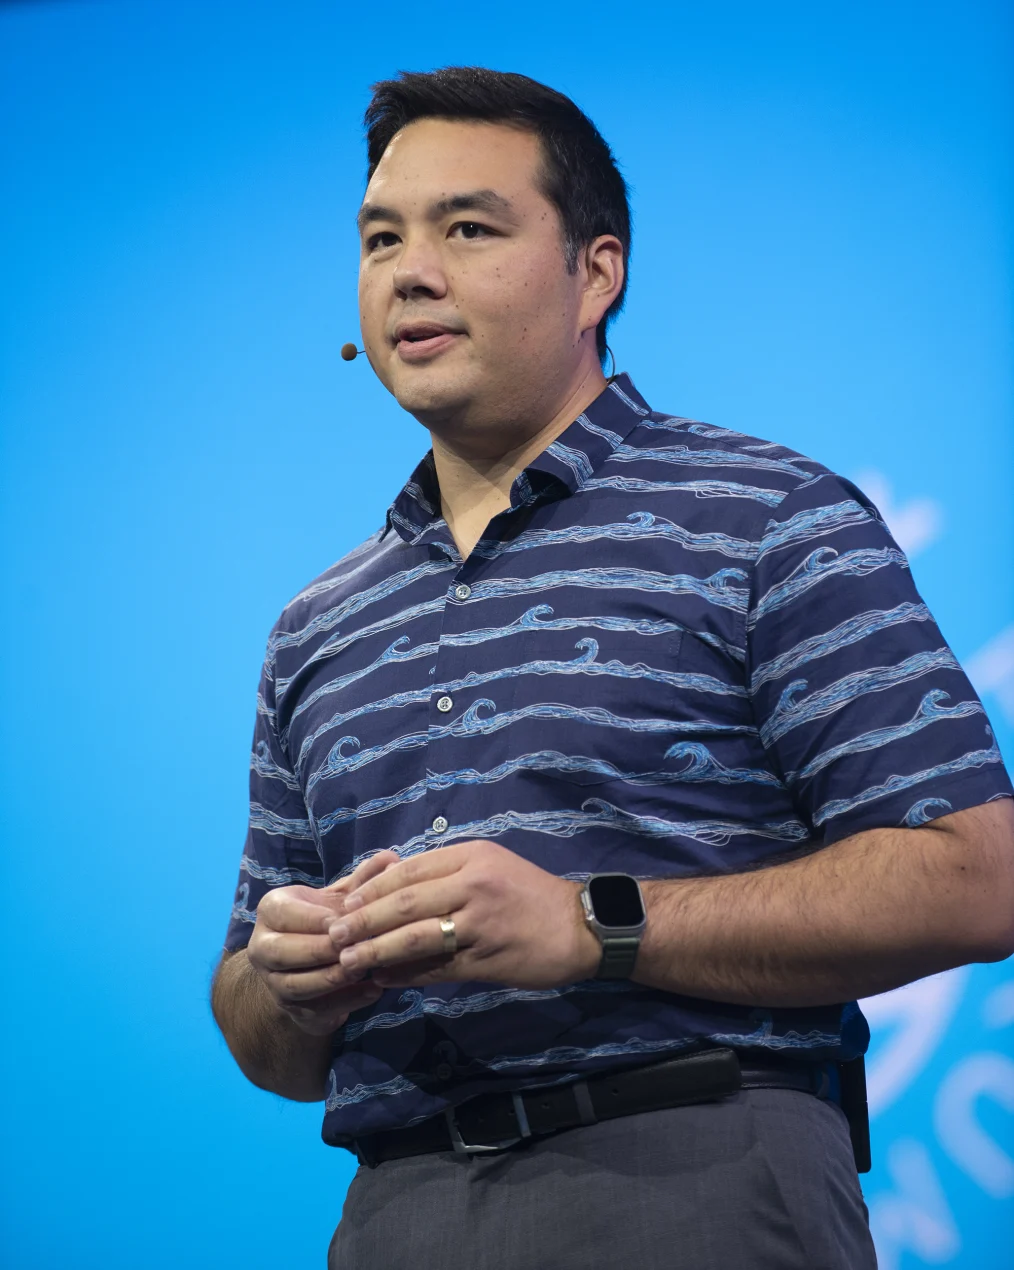 A middle aged man with light skin with warm under under tones, short slick black hair stands giving a speech. He has a mic attached coming behind his right ear. He has a polo shirt with waves, an apple watch on his left wrist, a black belt on, and grey pants. The background is a blurred light blue wall. 